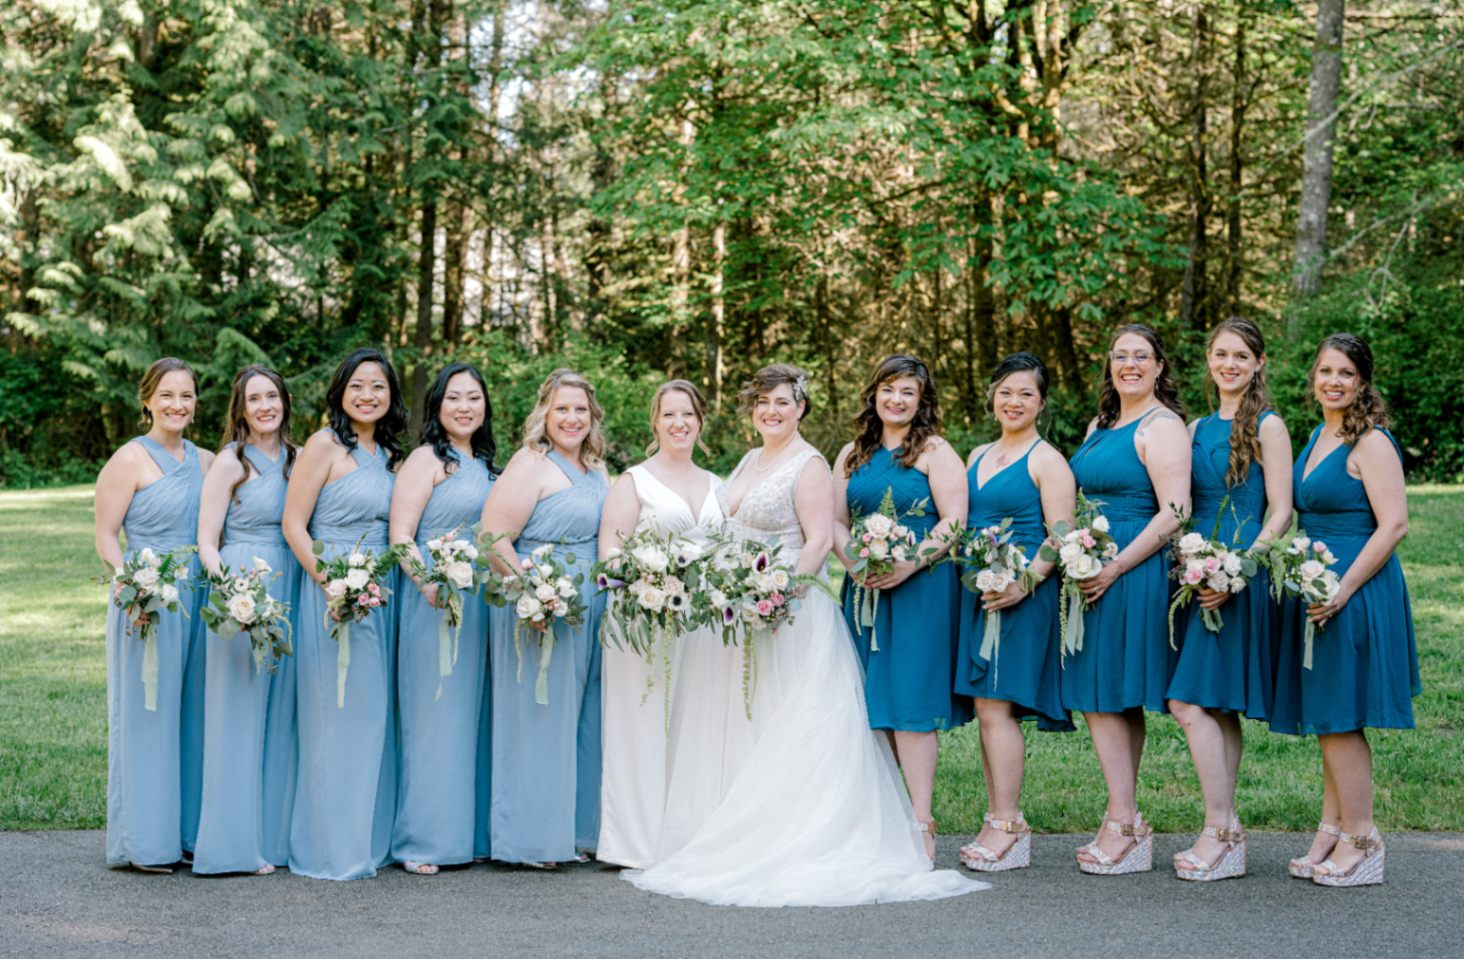 lesbian brides, one in a white wedding gown, and one in a white bridal jumpsuit, with their wedding party and bridesmaids, some in in teal blue knee length dresses and others in light blue pantsuits